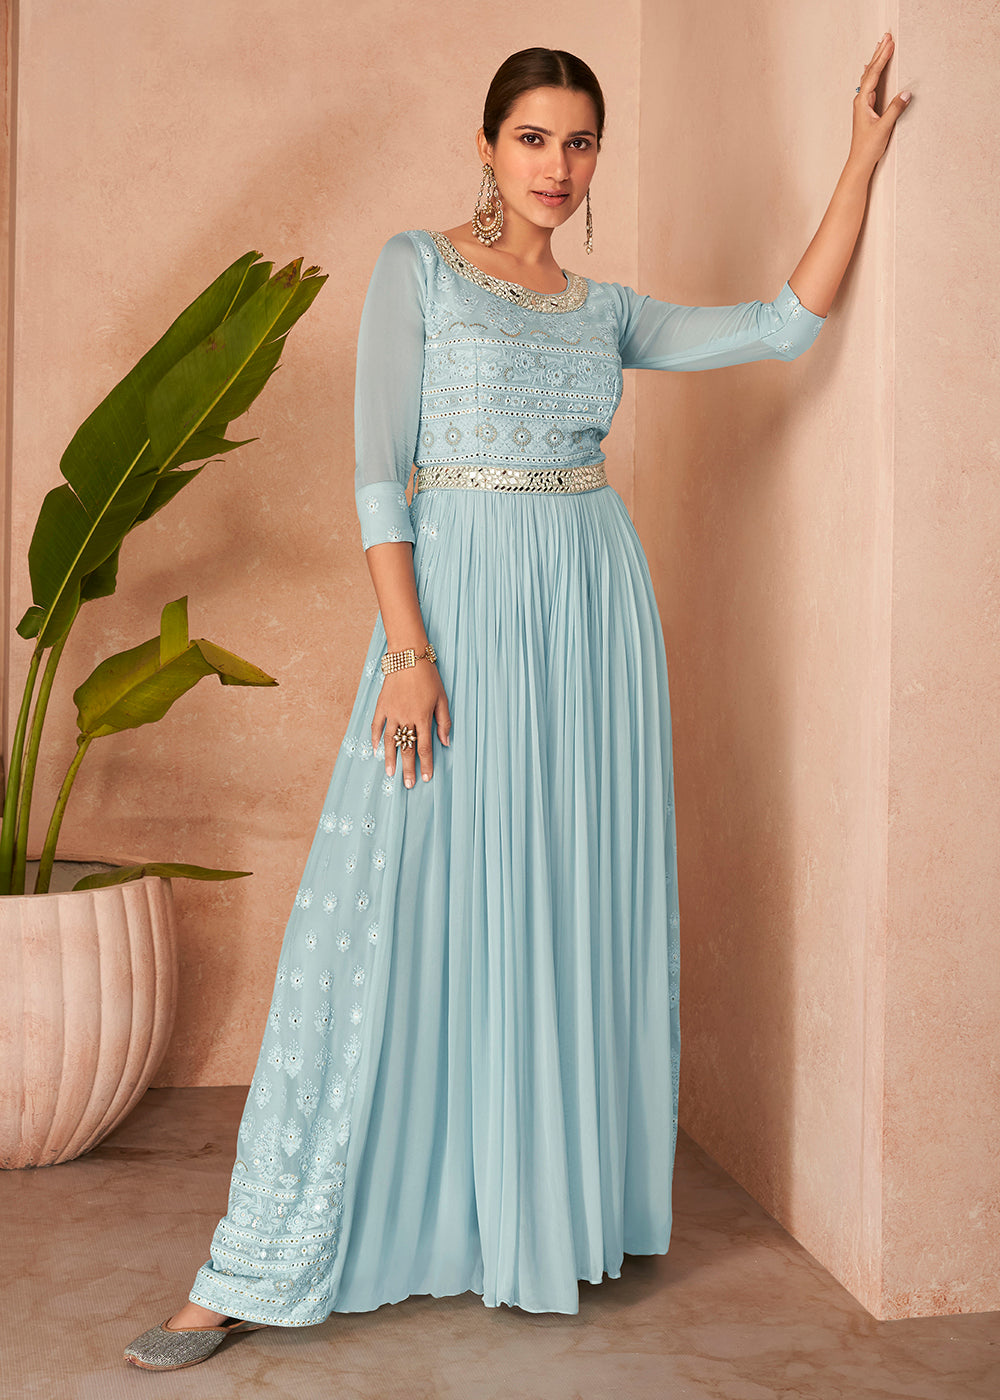 Shop Luxury Dresses Online in the Middle East